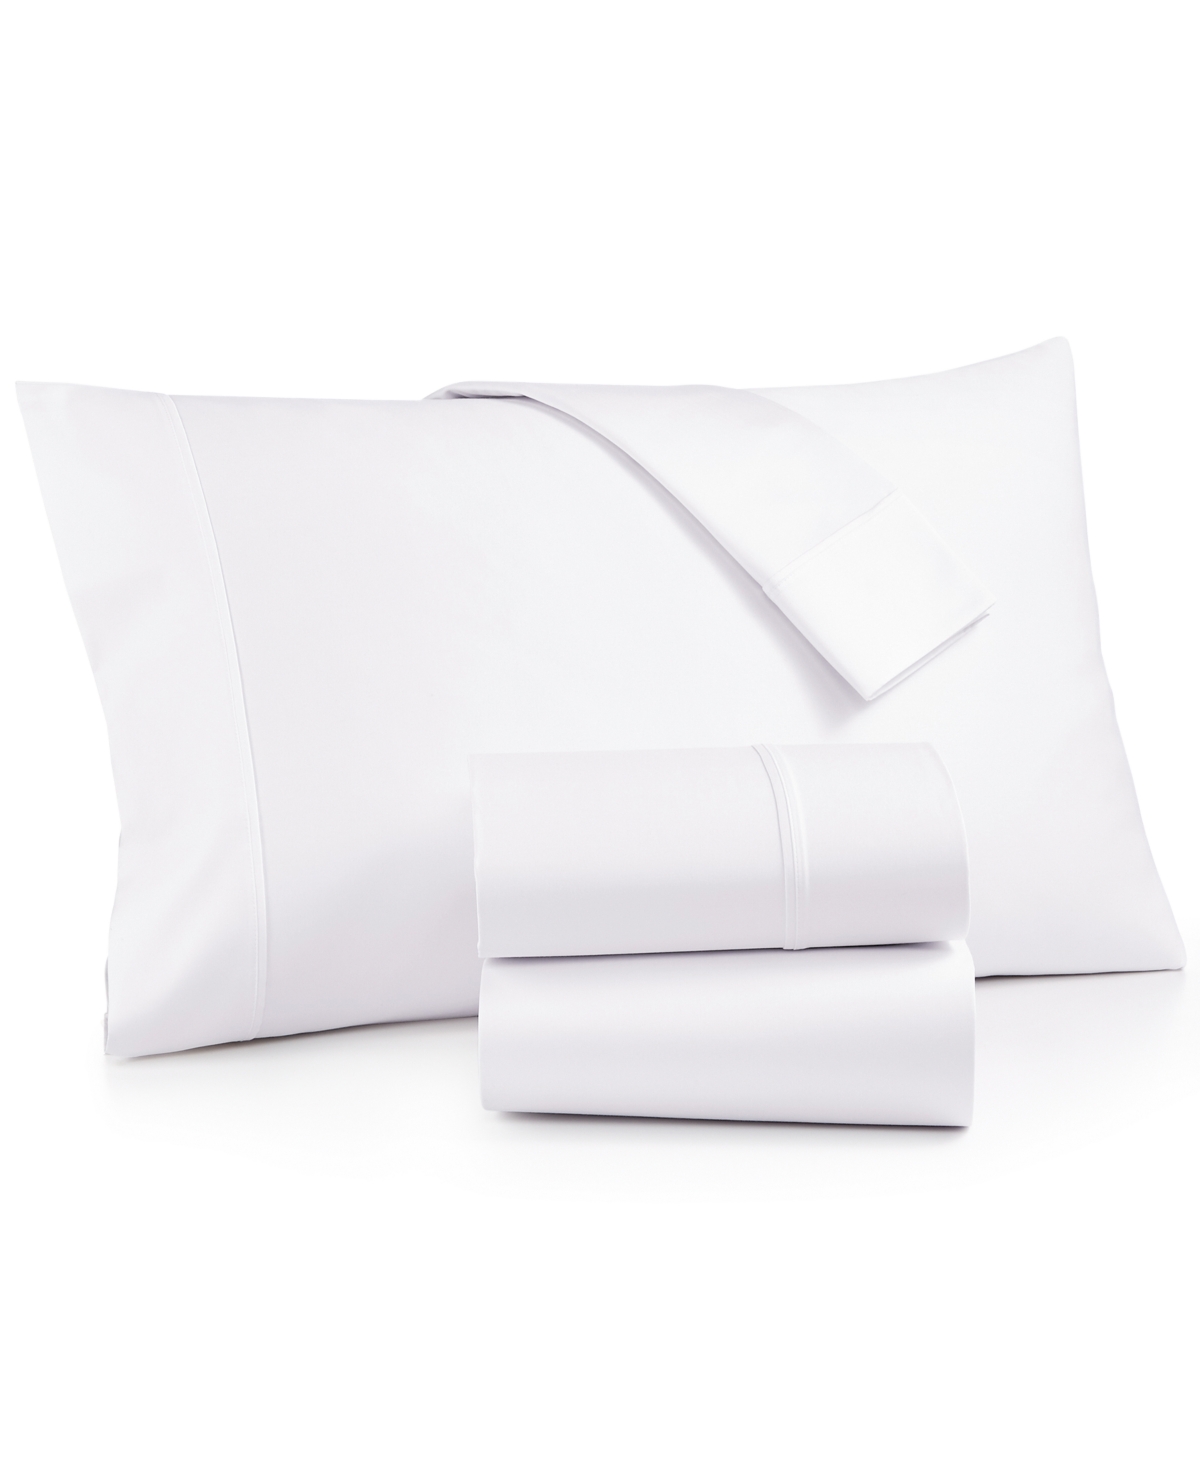 Aq Textiles Bergen House 100% Certified Egyptian Cotton 1000 Thread Count 4 Pc. Sheet Set, California King In White